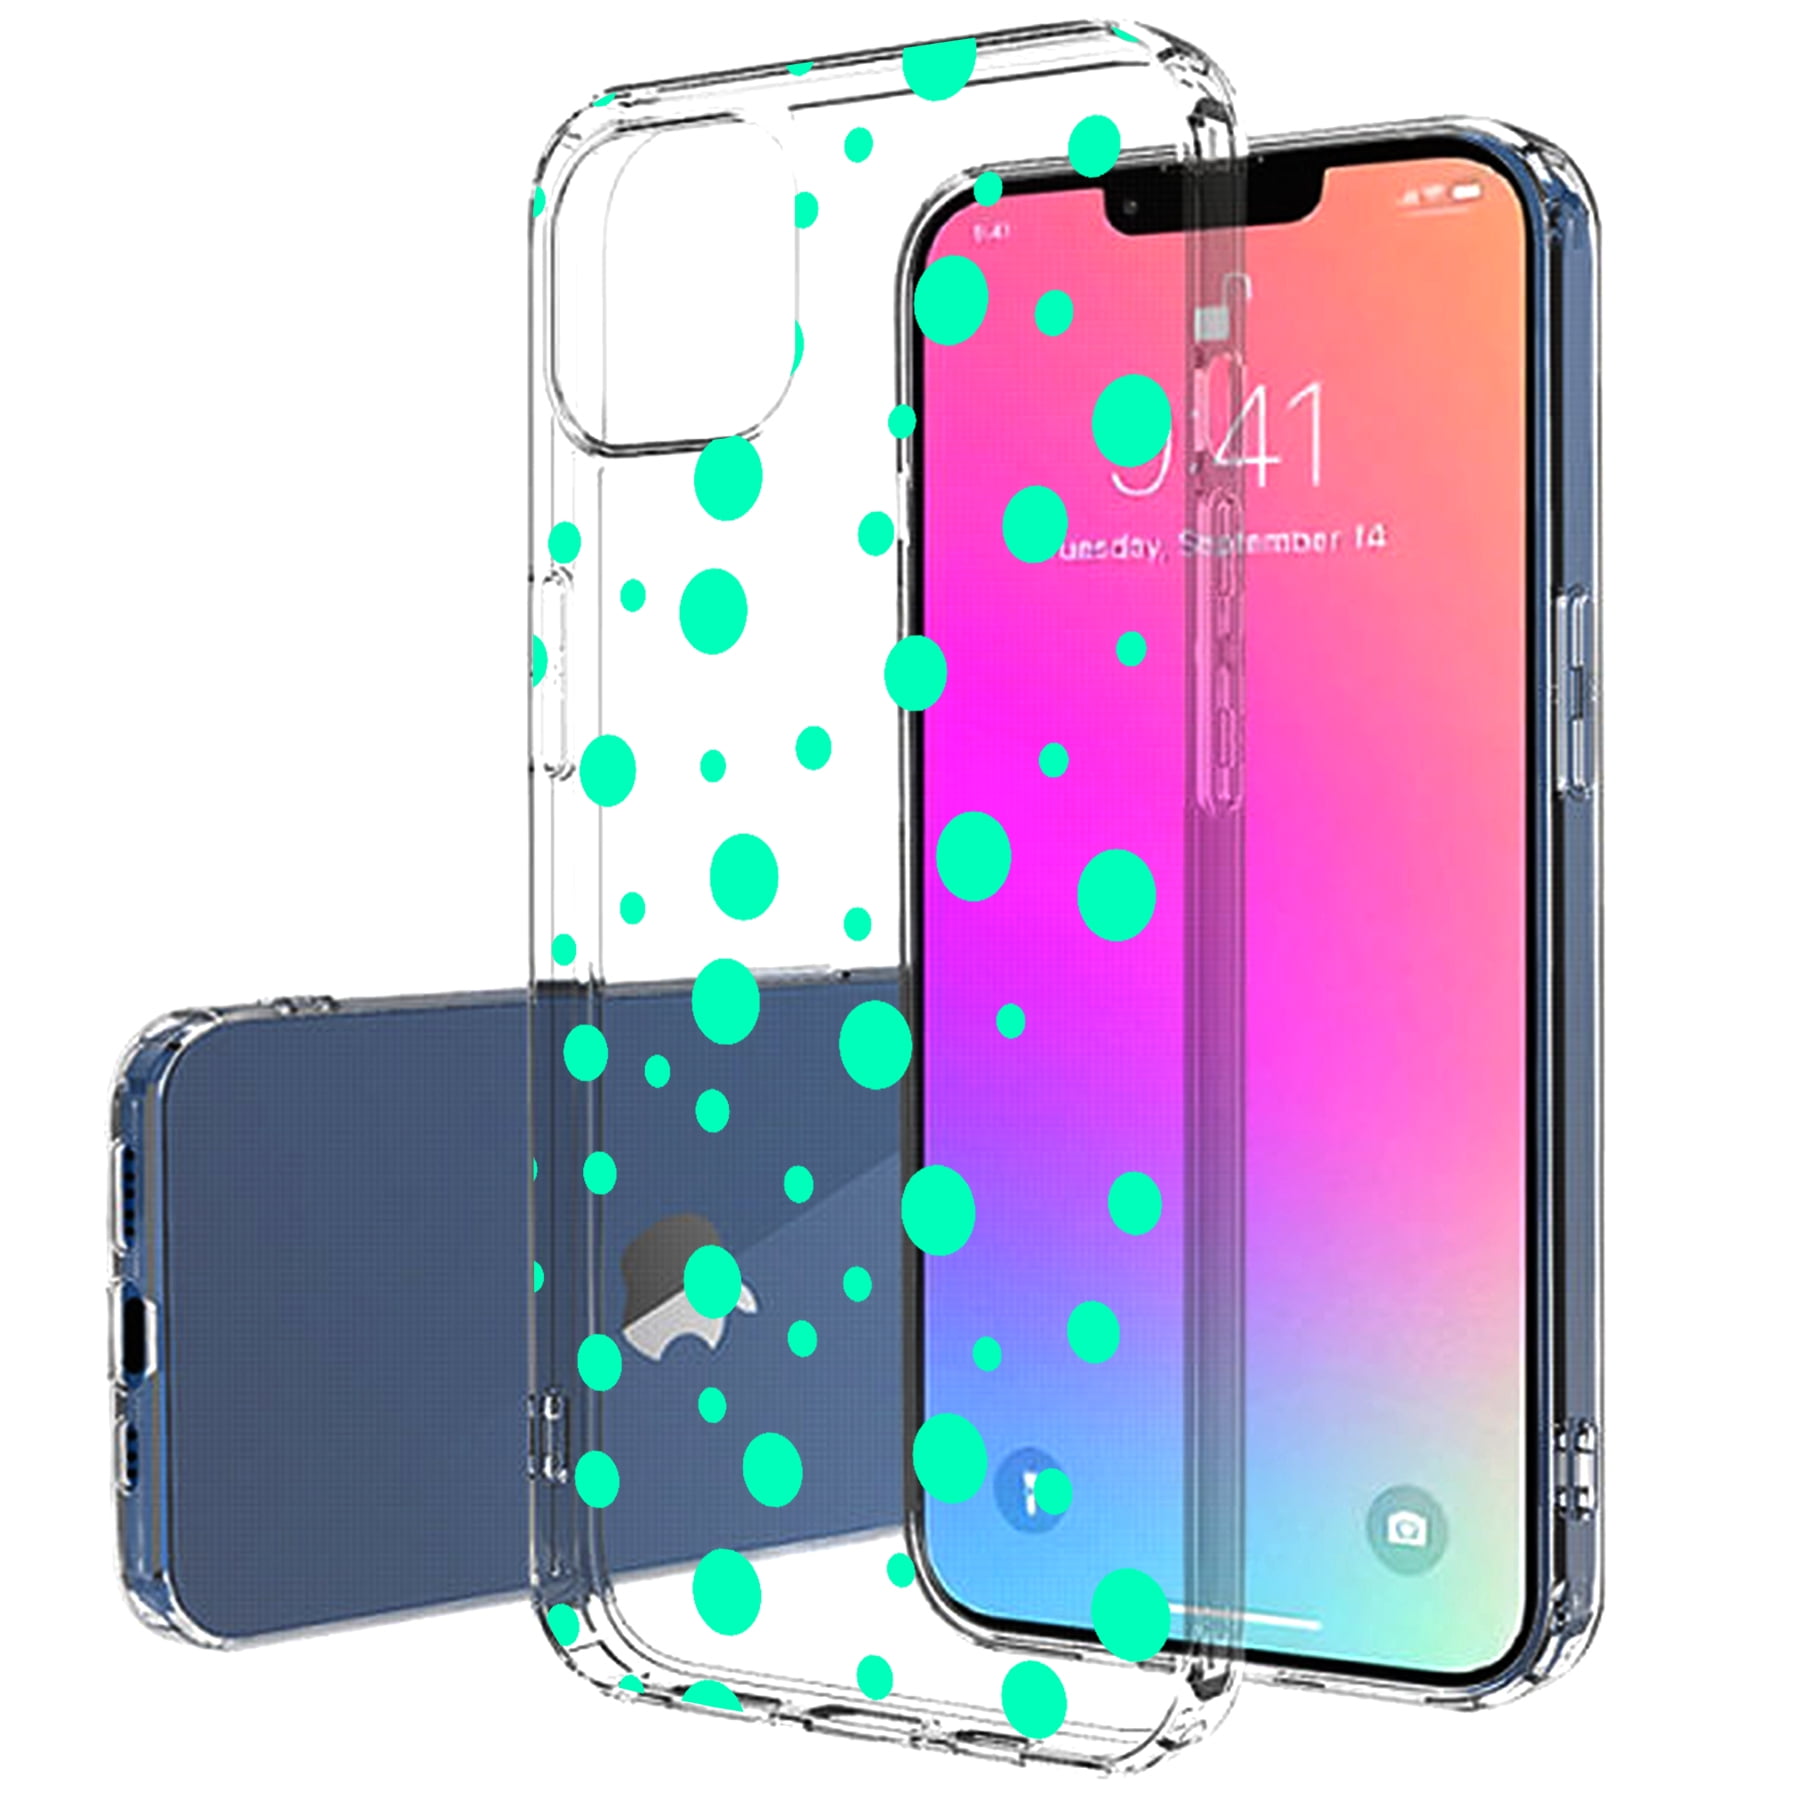 Flexible Light Weight TalkingCase Slim Case for Apple iPhone 13 Pro Color Polka Dots Print Soft,Anti-Scratch,USA Thin Gel Tpu Cover